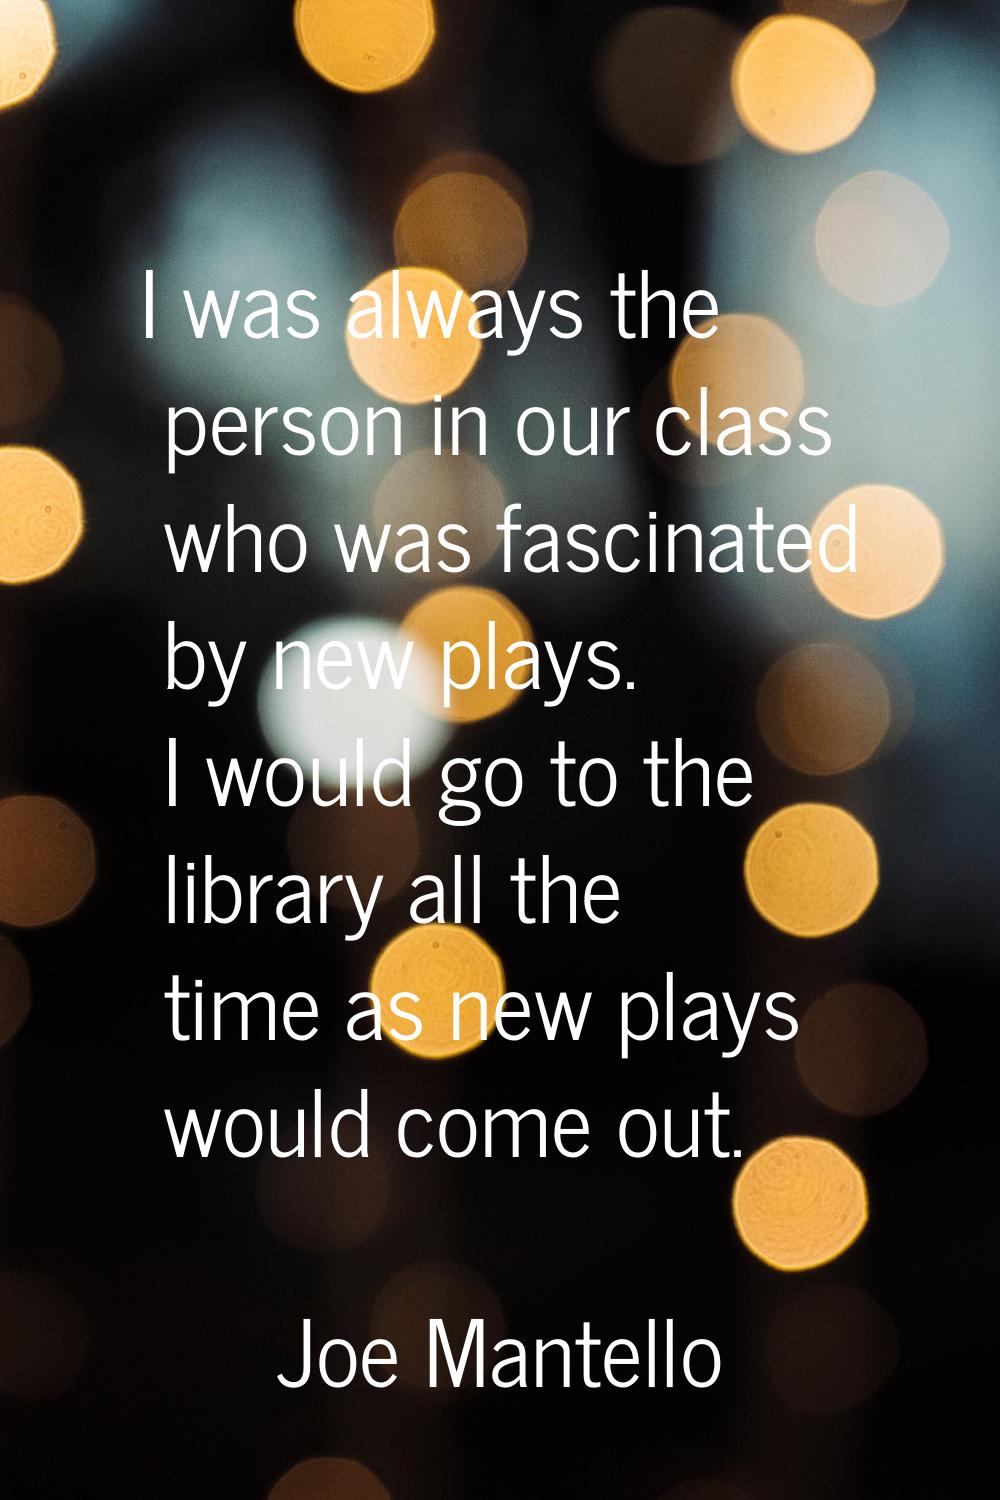 I was always the person in our class who was fascinated by new plays. I would go to the library all